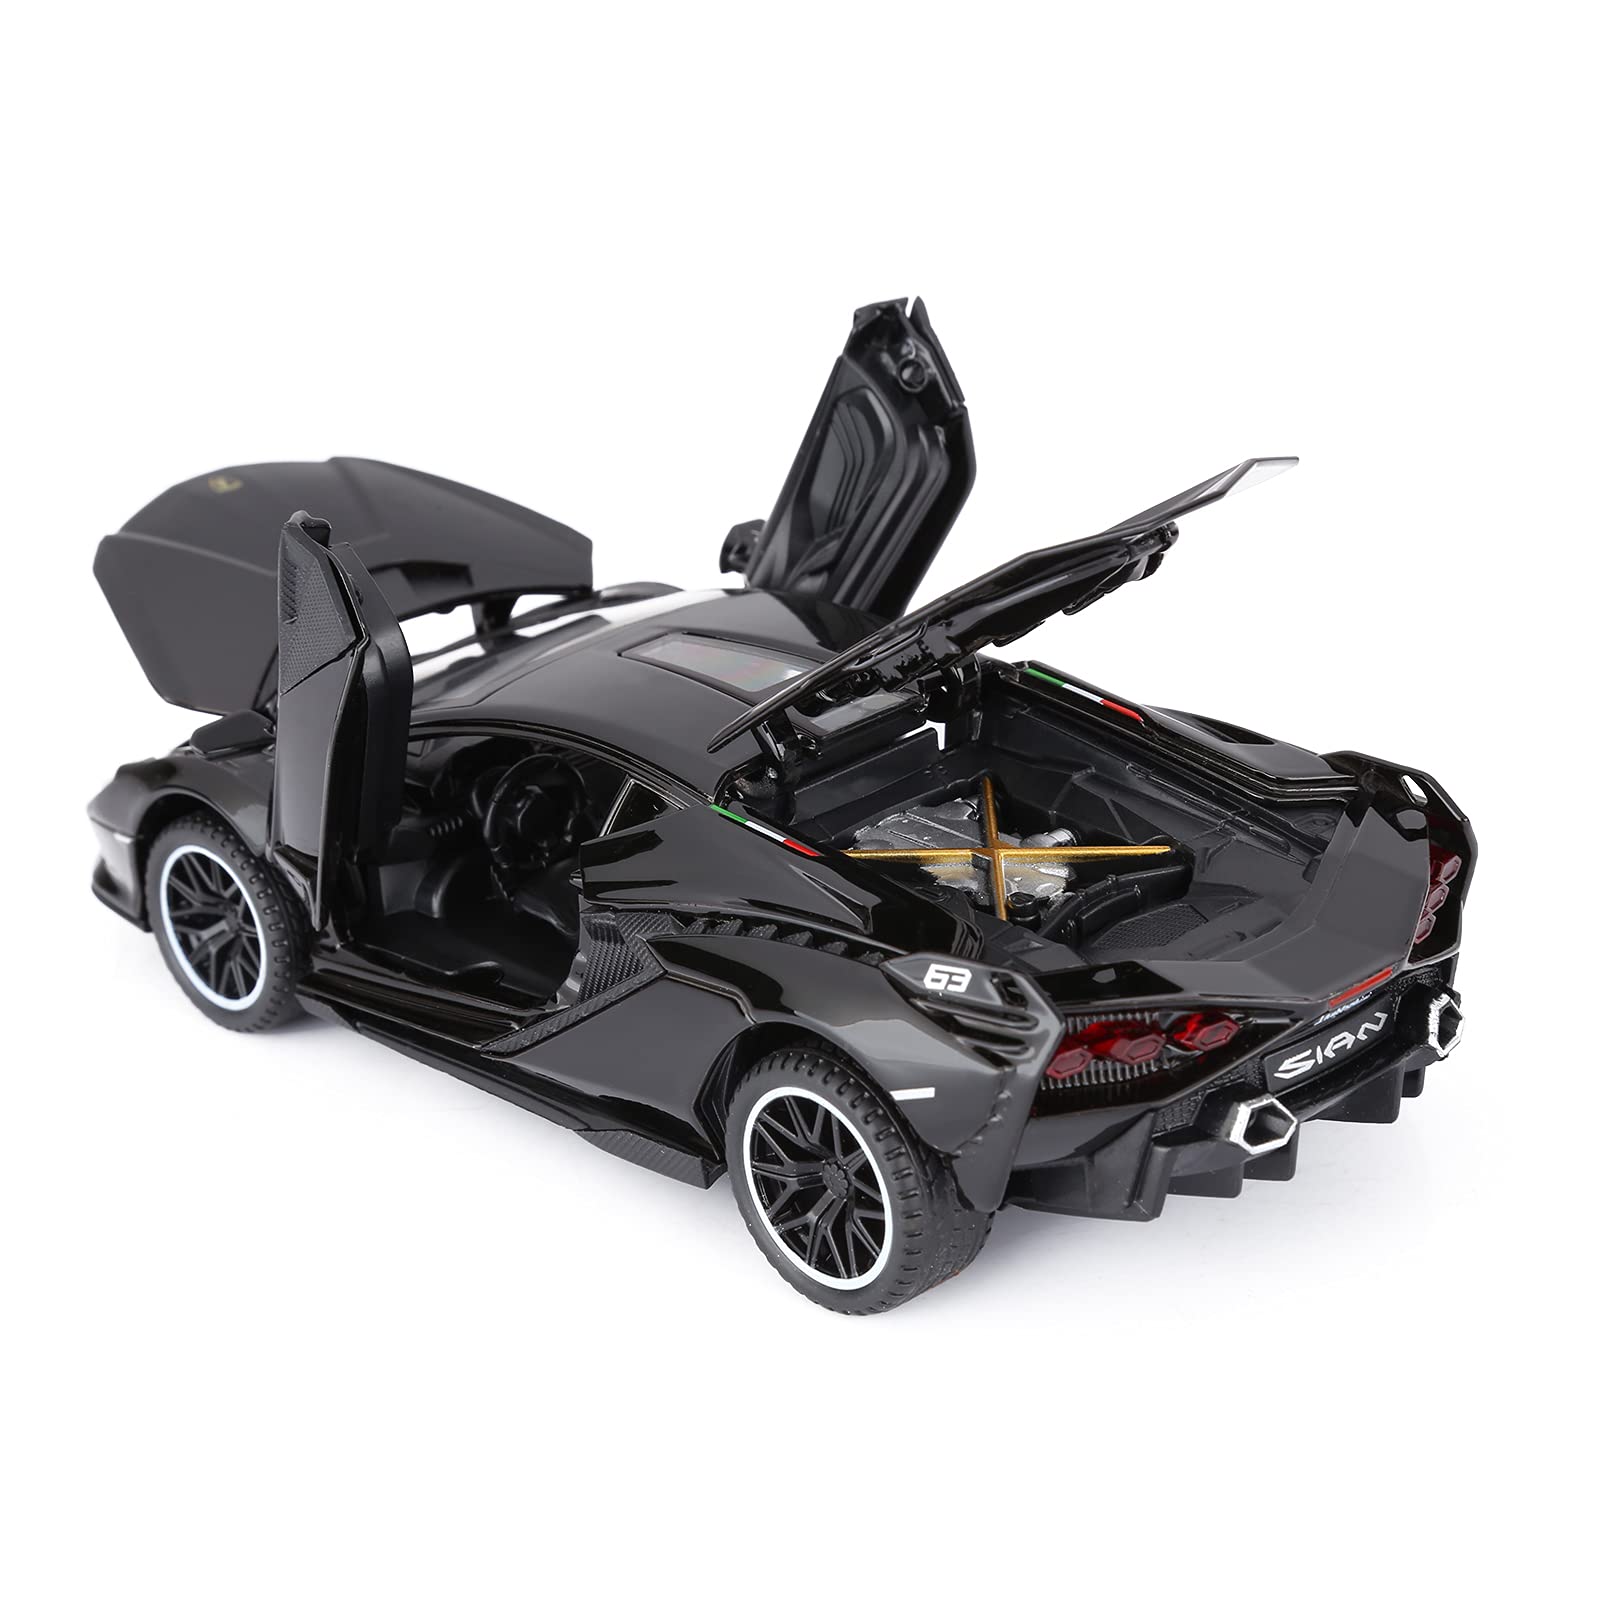 SASBSC Toy Cars Lambo Sian FKP3 Metal Model Car with Light and Sound Pull Back Toy Car for Boys Age 3 + Year Old (Black)